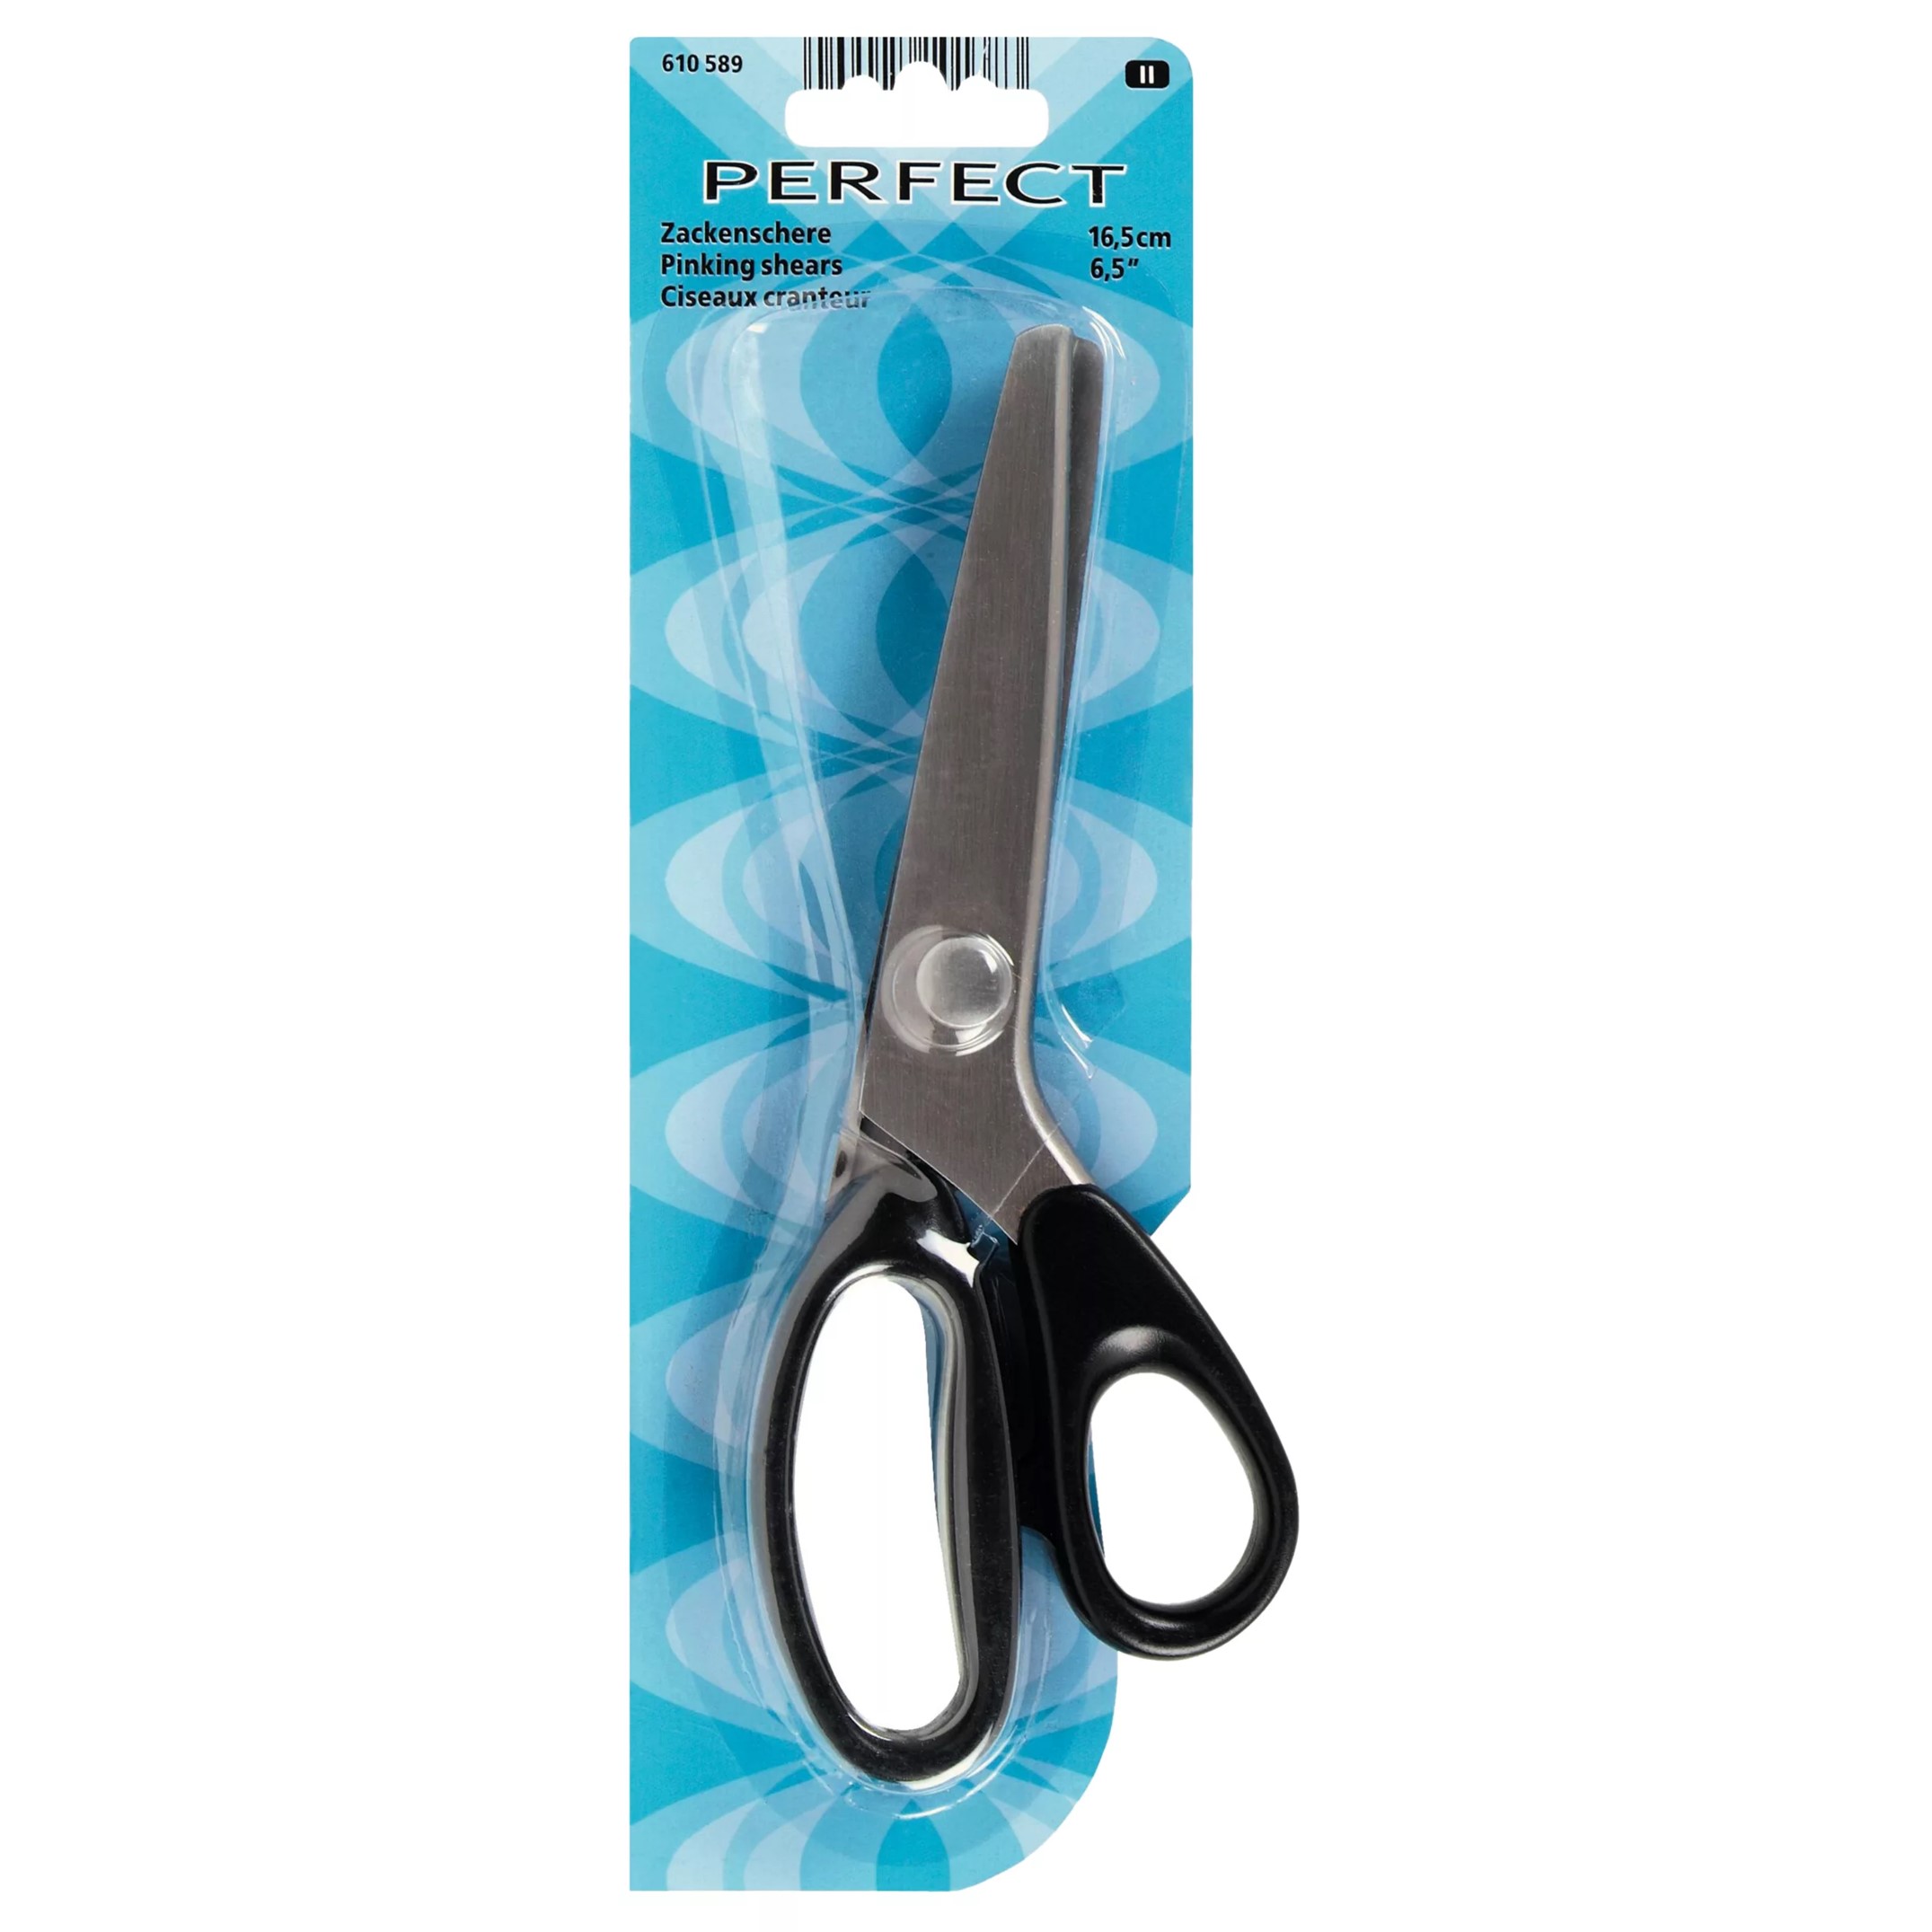 PERFECT PINKING SHEARS 6.5"/16.5CM 610589